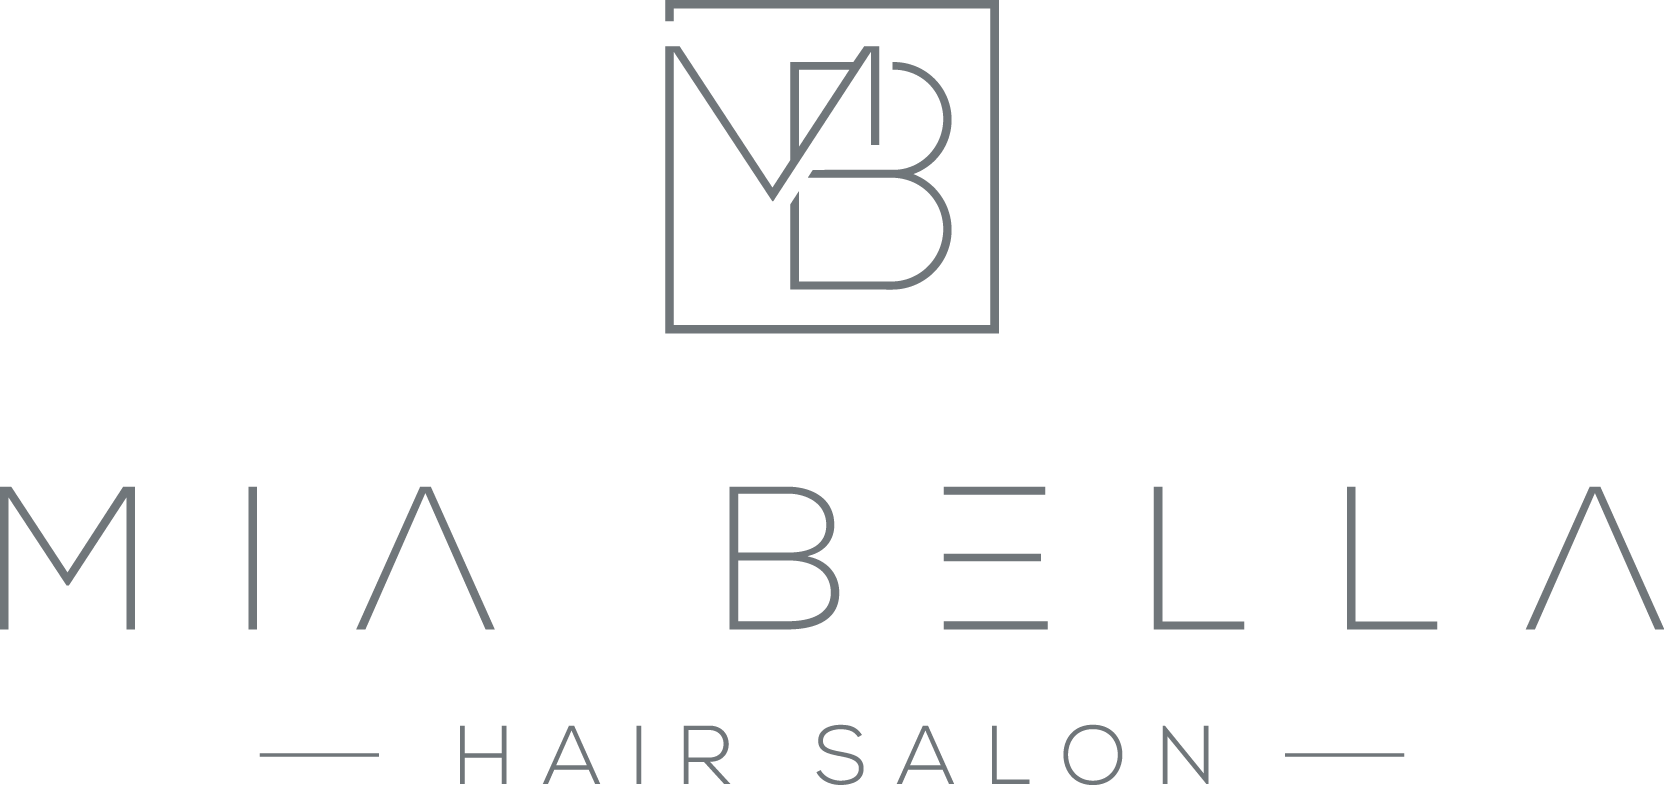 A Hair Salon Provides A Wide Range Of Beauty Services, From Hair Cutting And Styling To Blow-dryi ...